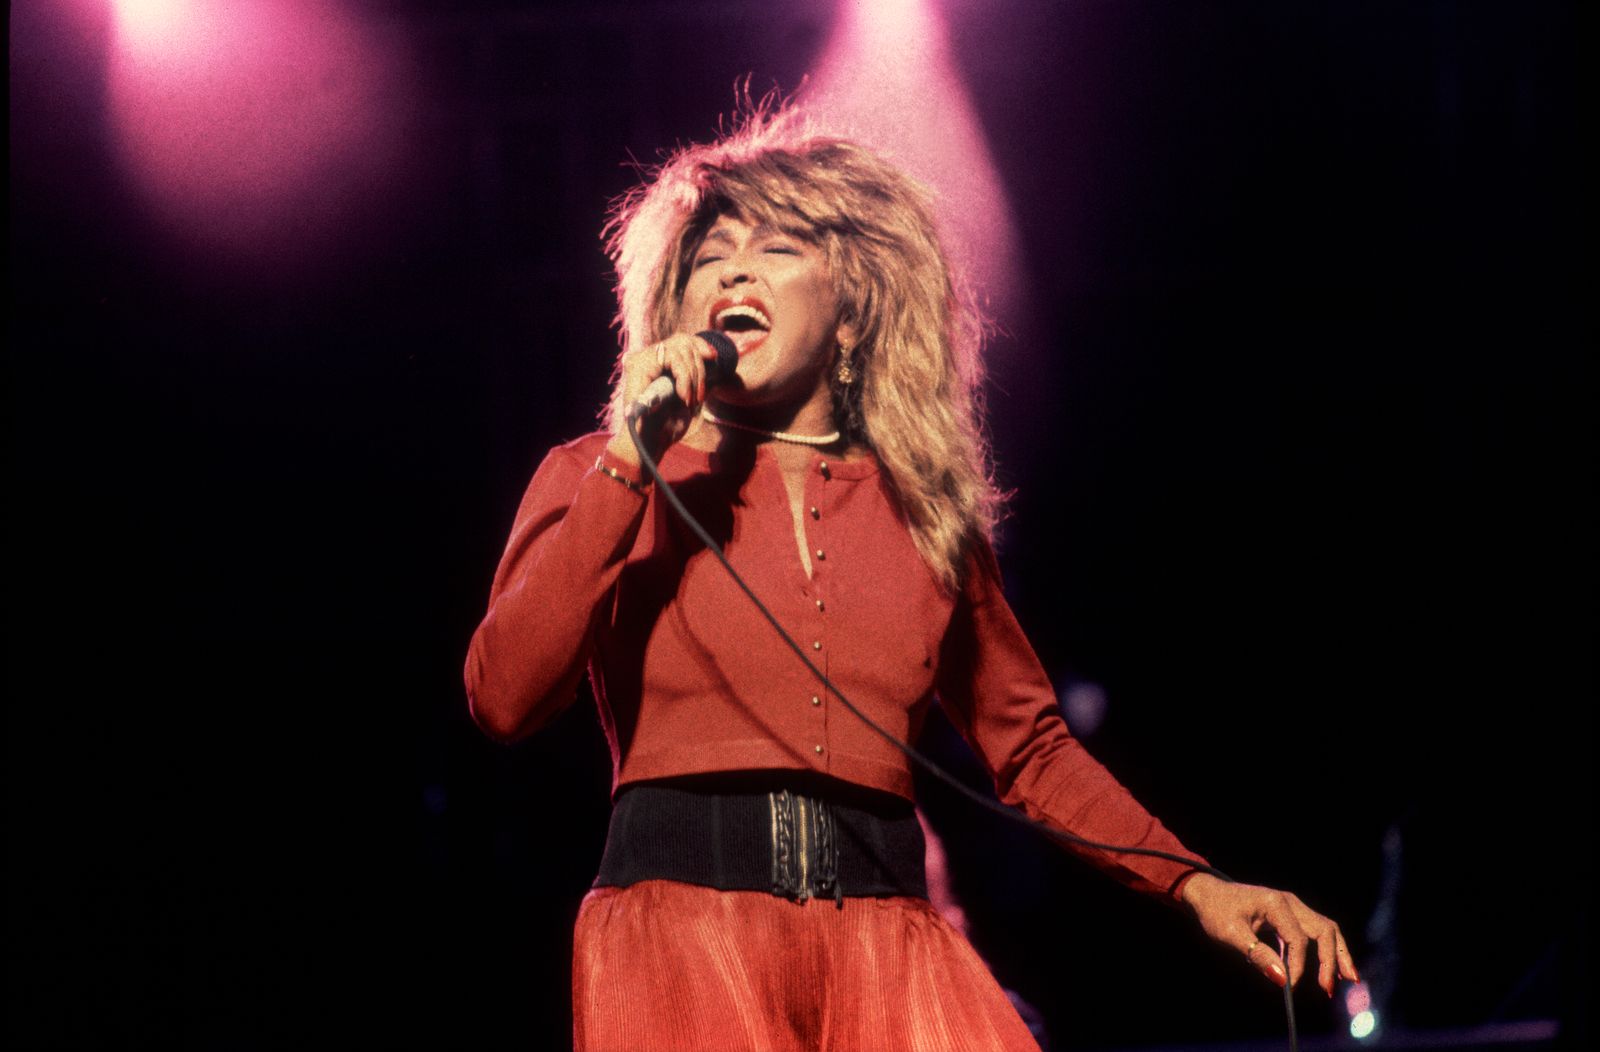  Tina Turner, Queen of Rock ‘n’ Roll, Left an Indelible Mark on Music History 